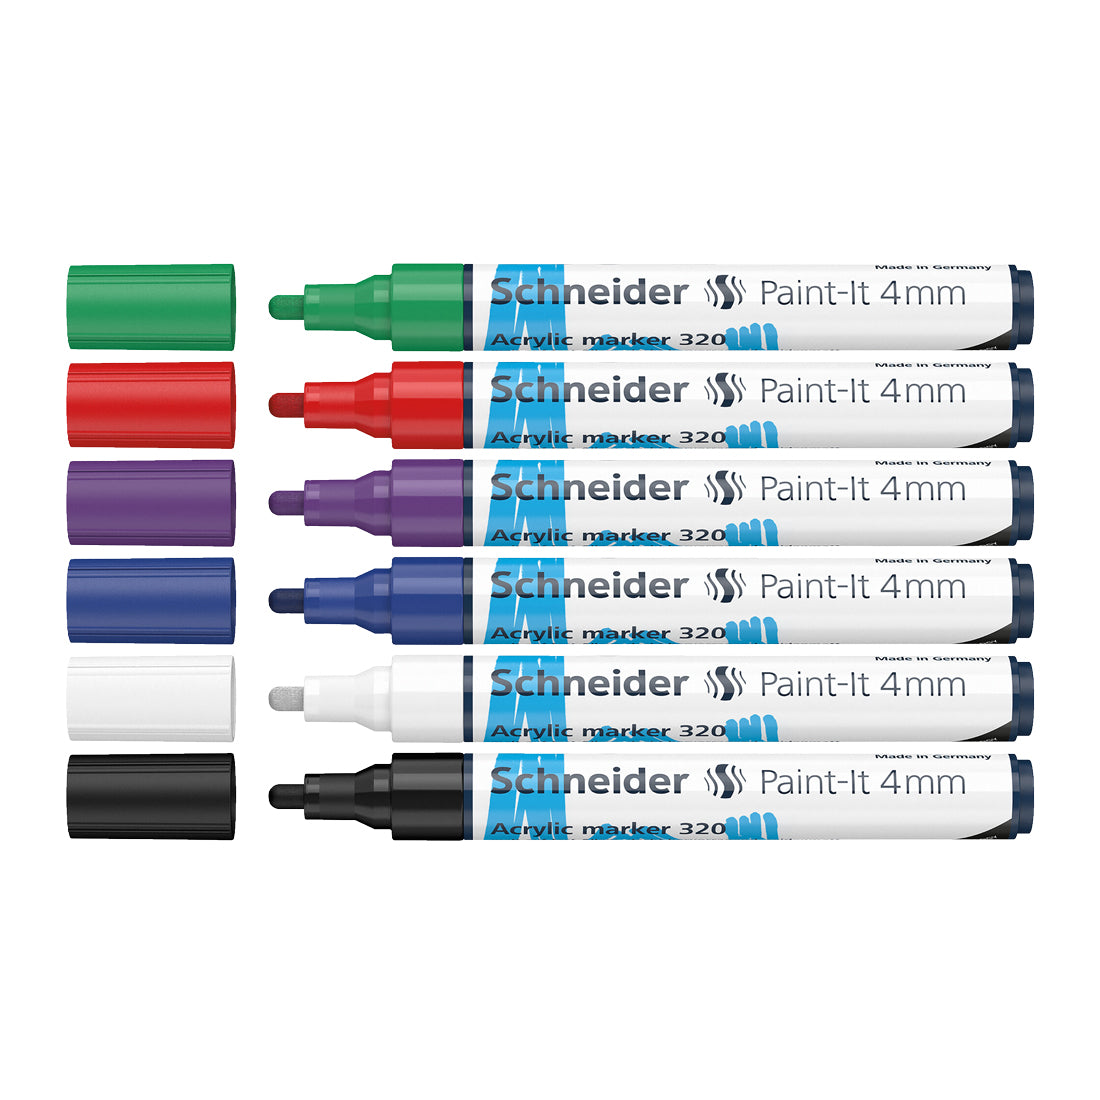 Schneider Paint-It 310 Acrylic Markers, 2 mm Bullet Tip, Wallet, 6 Assorted  Pastel Ink Colors 